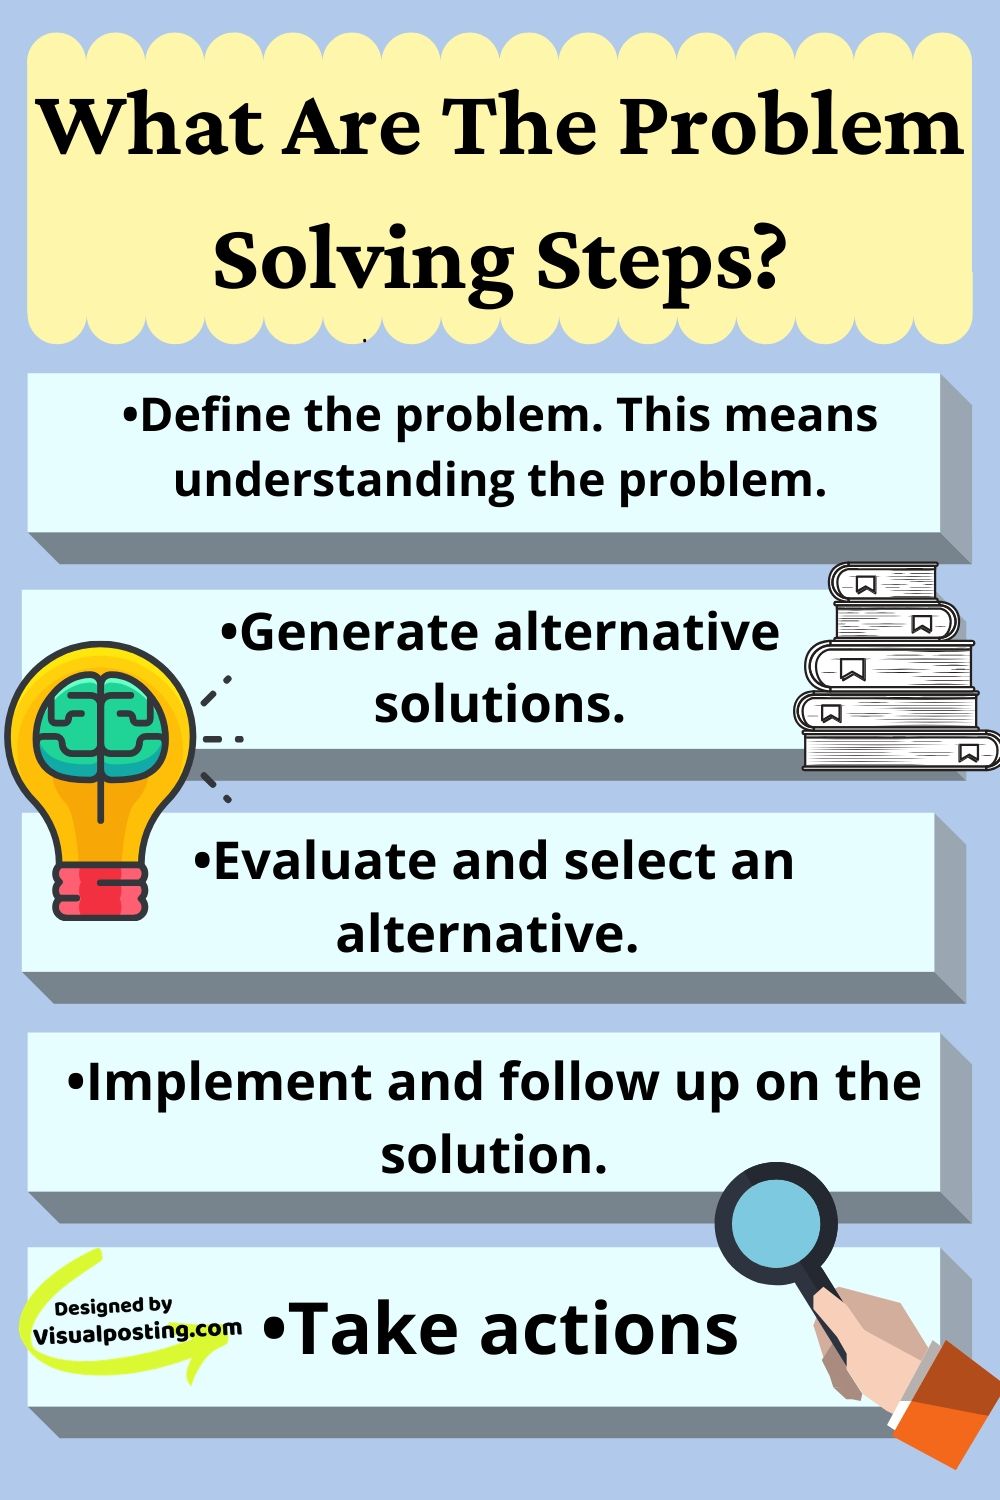 problem solving skills meaning in english